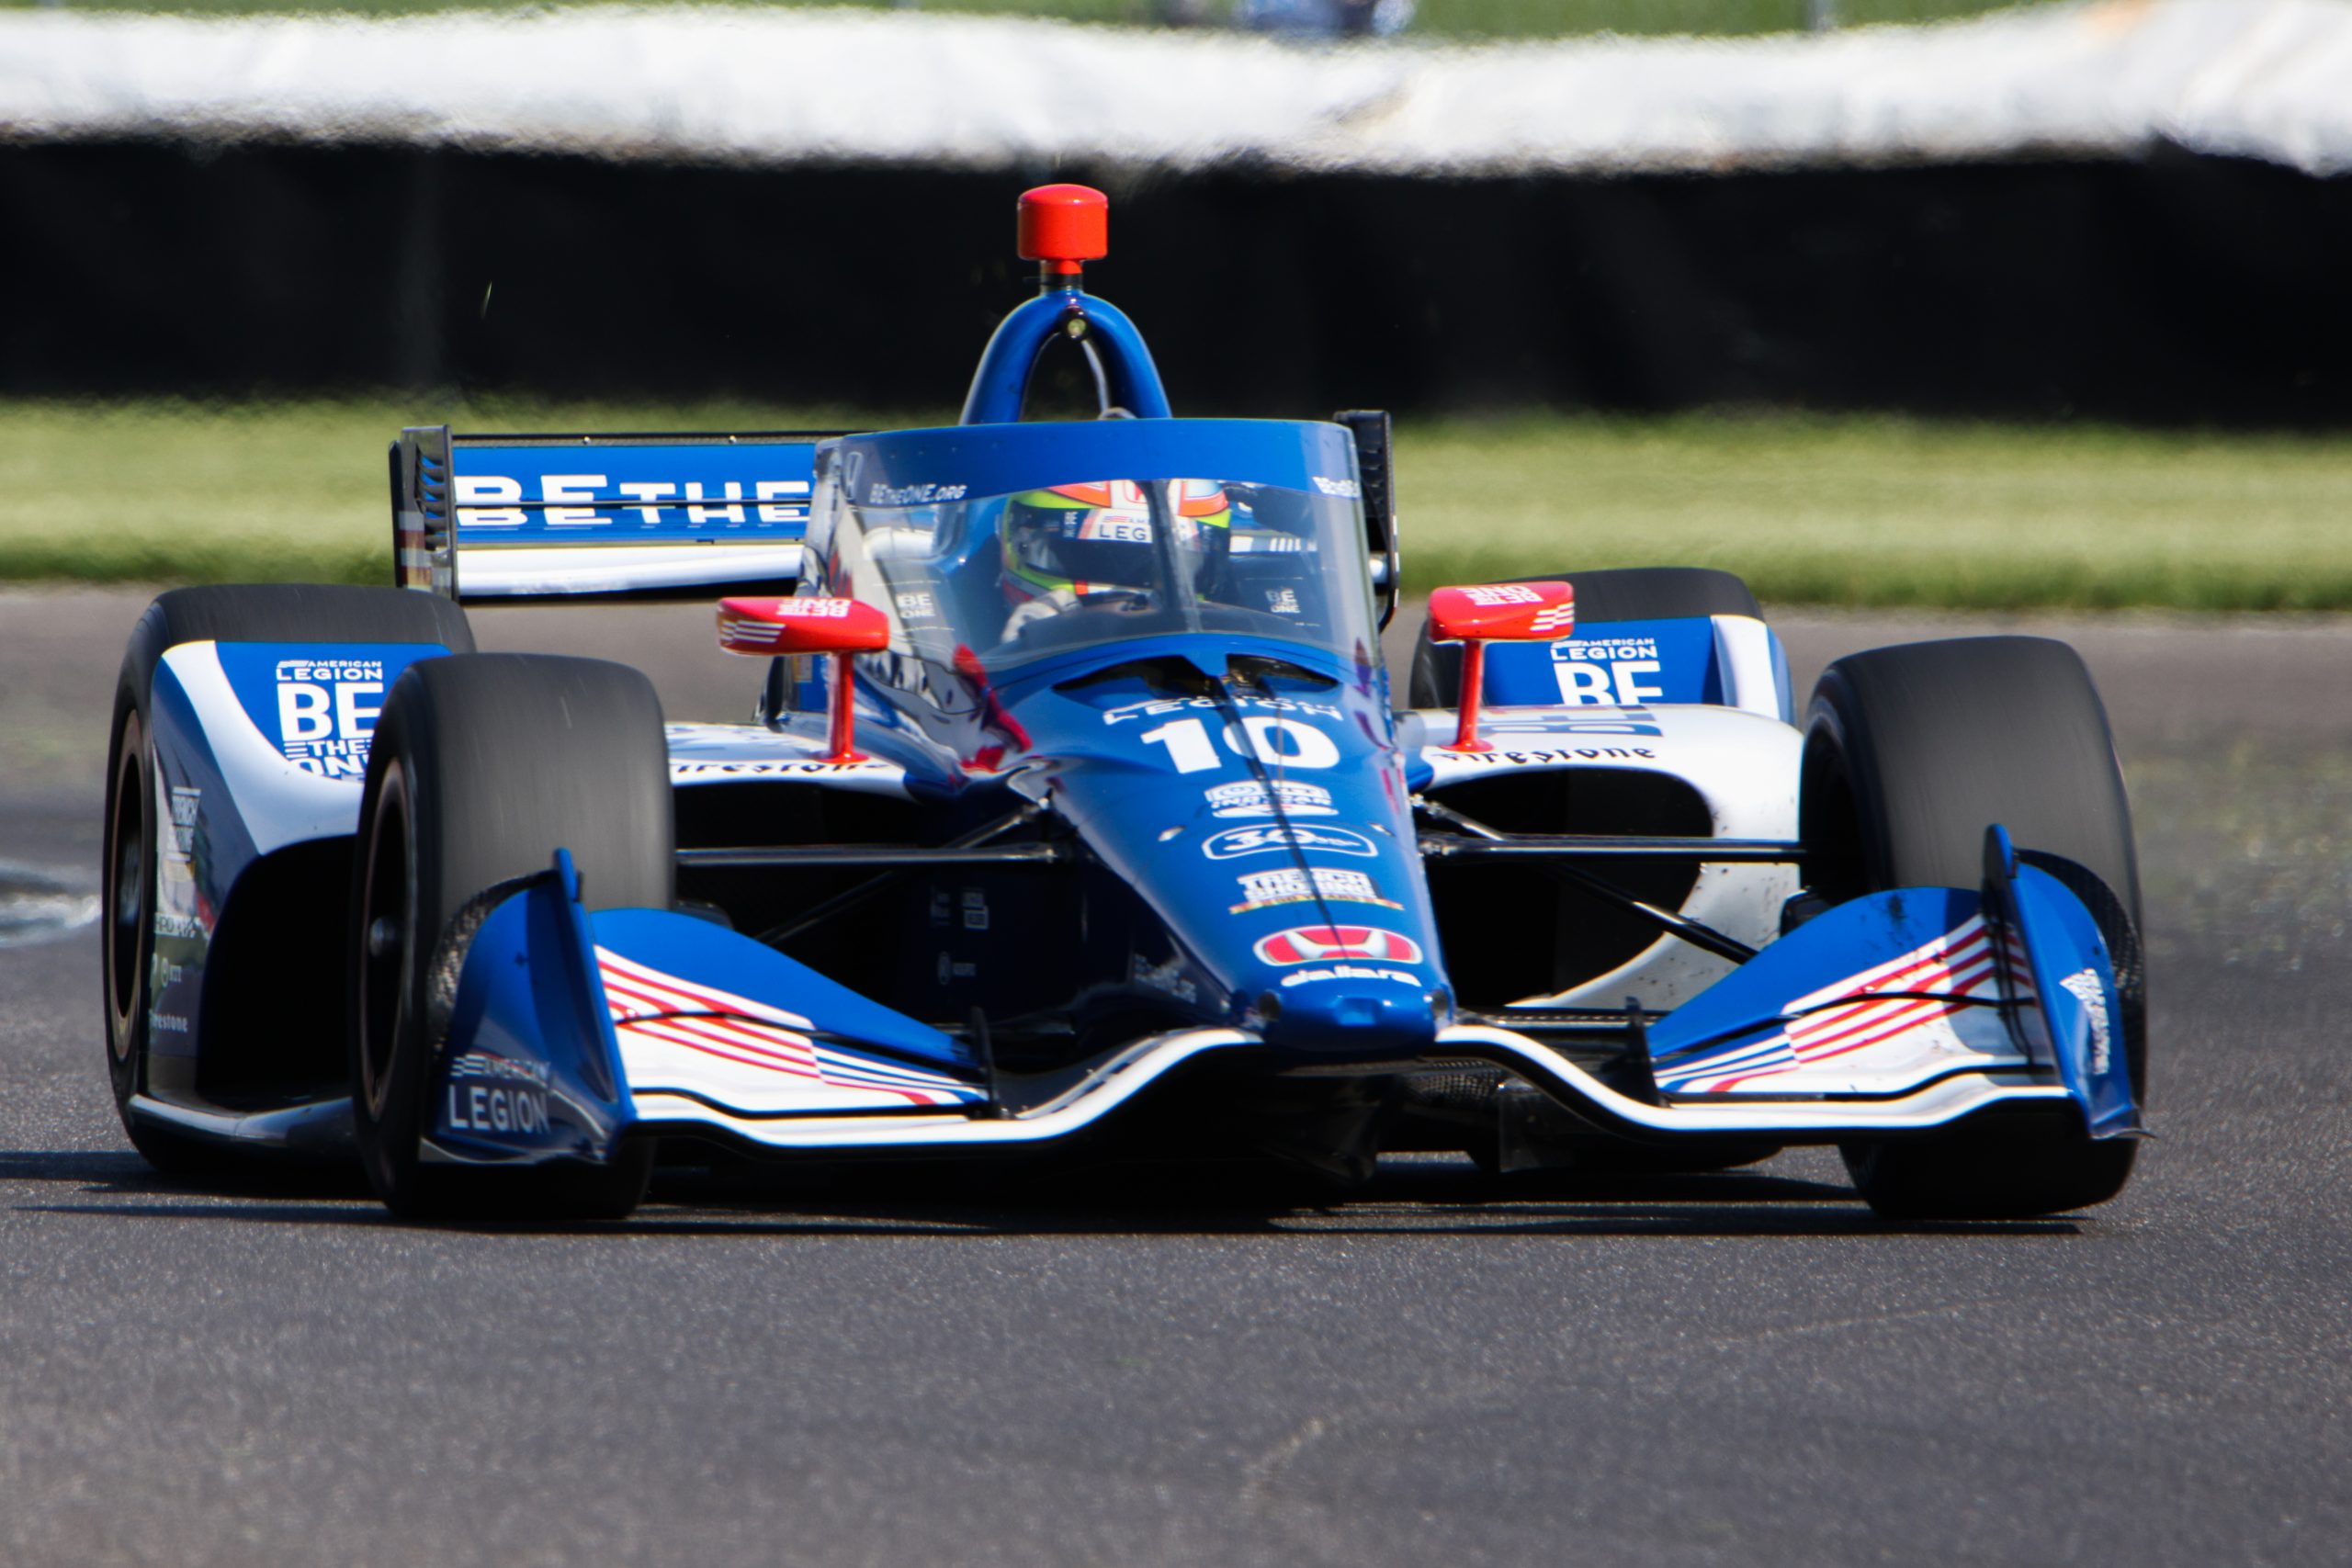 Alex Palou has been fast in both practices at Indy. (Photo: Wayne Riegle|TPF)